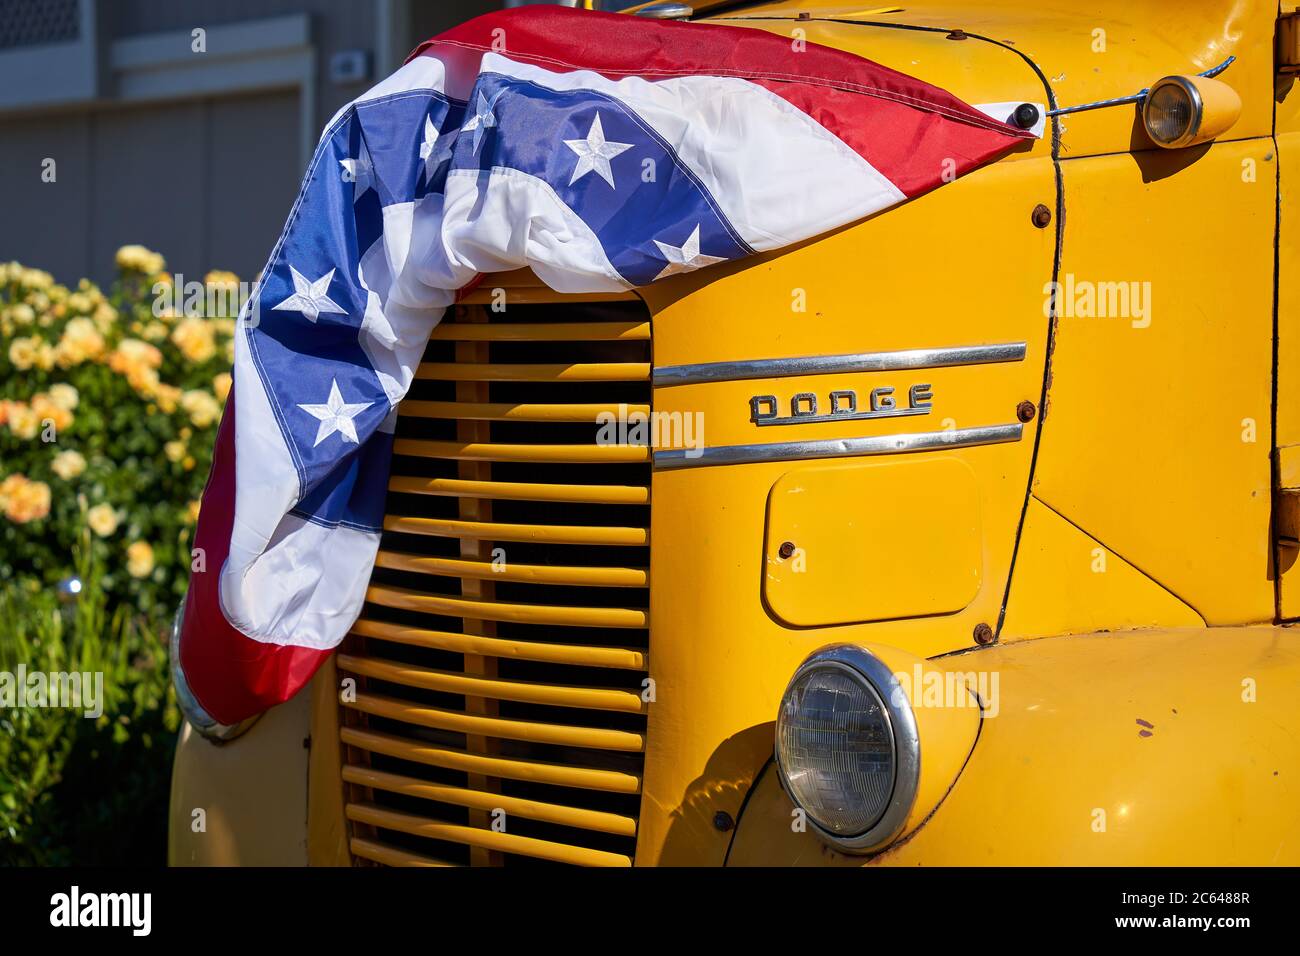 Classic Dodge truck with yellow exterior and American bunting flag on the hood. California Historical Vehicle in Windsor, California. Stock Photo